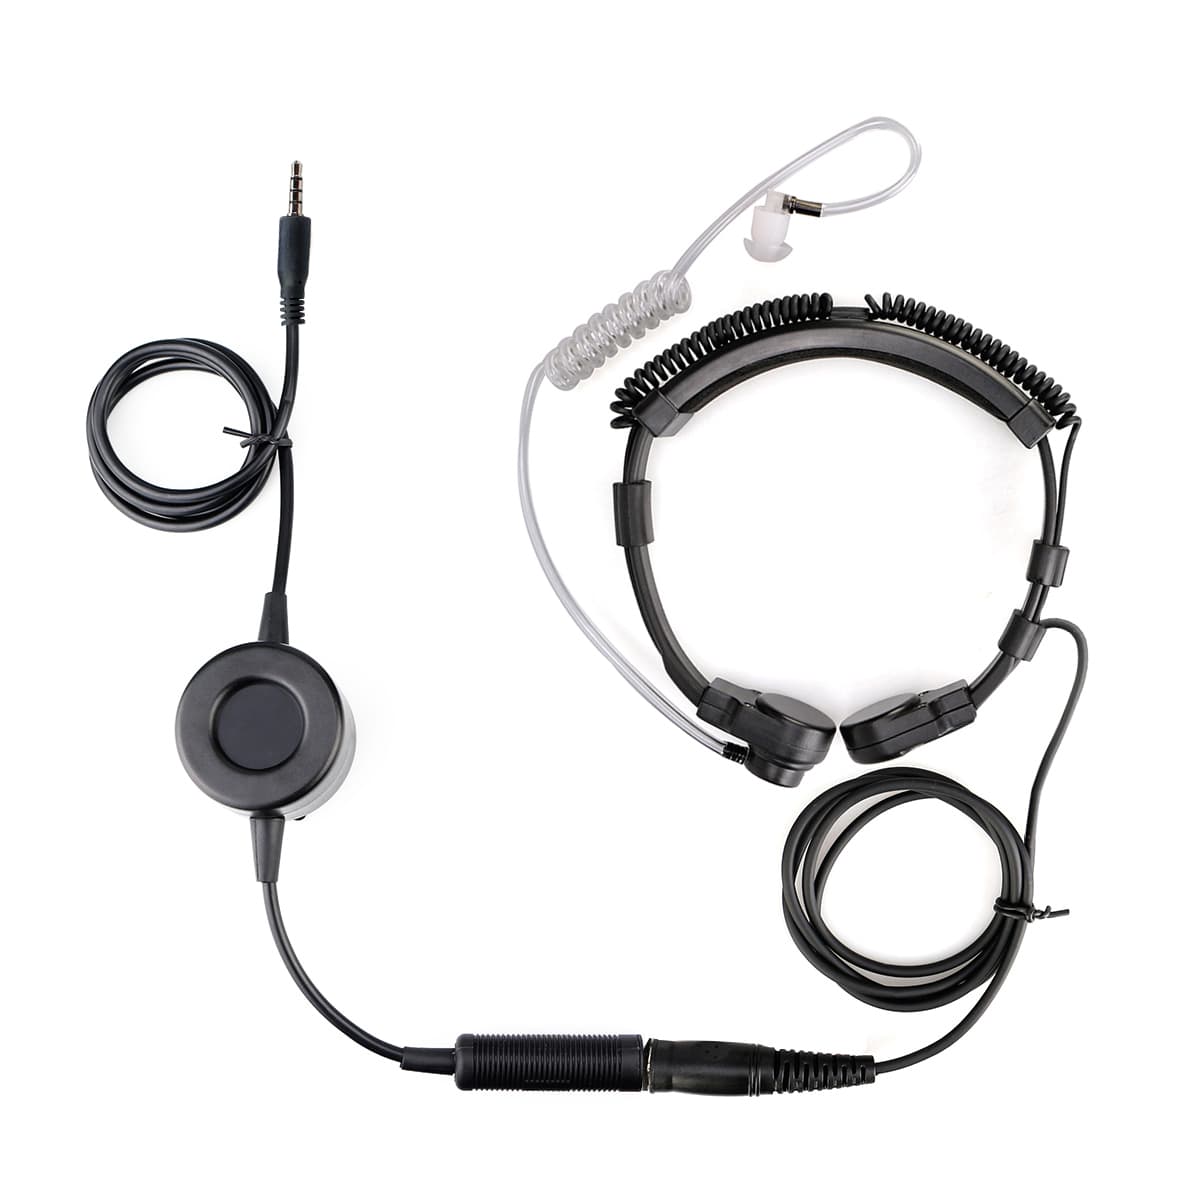 Retevis ETK006 Throat Microphone for Cell Phone